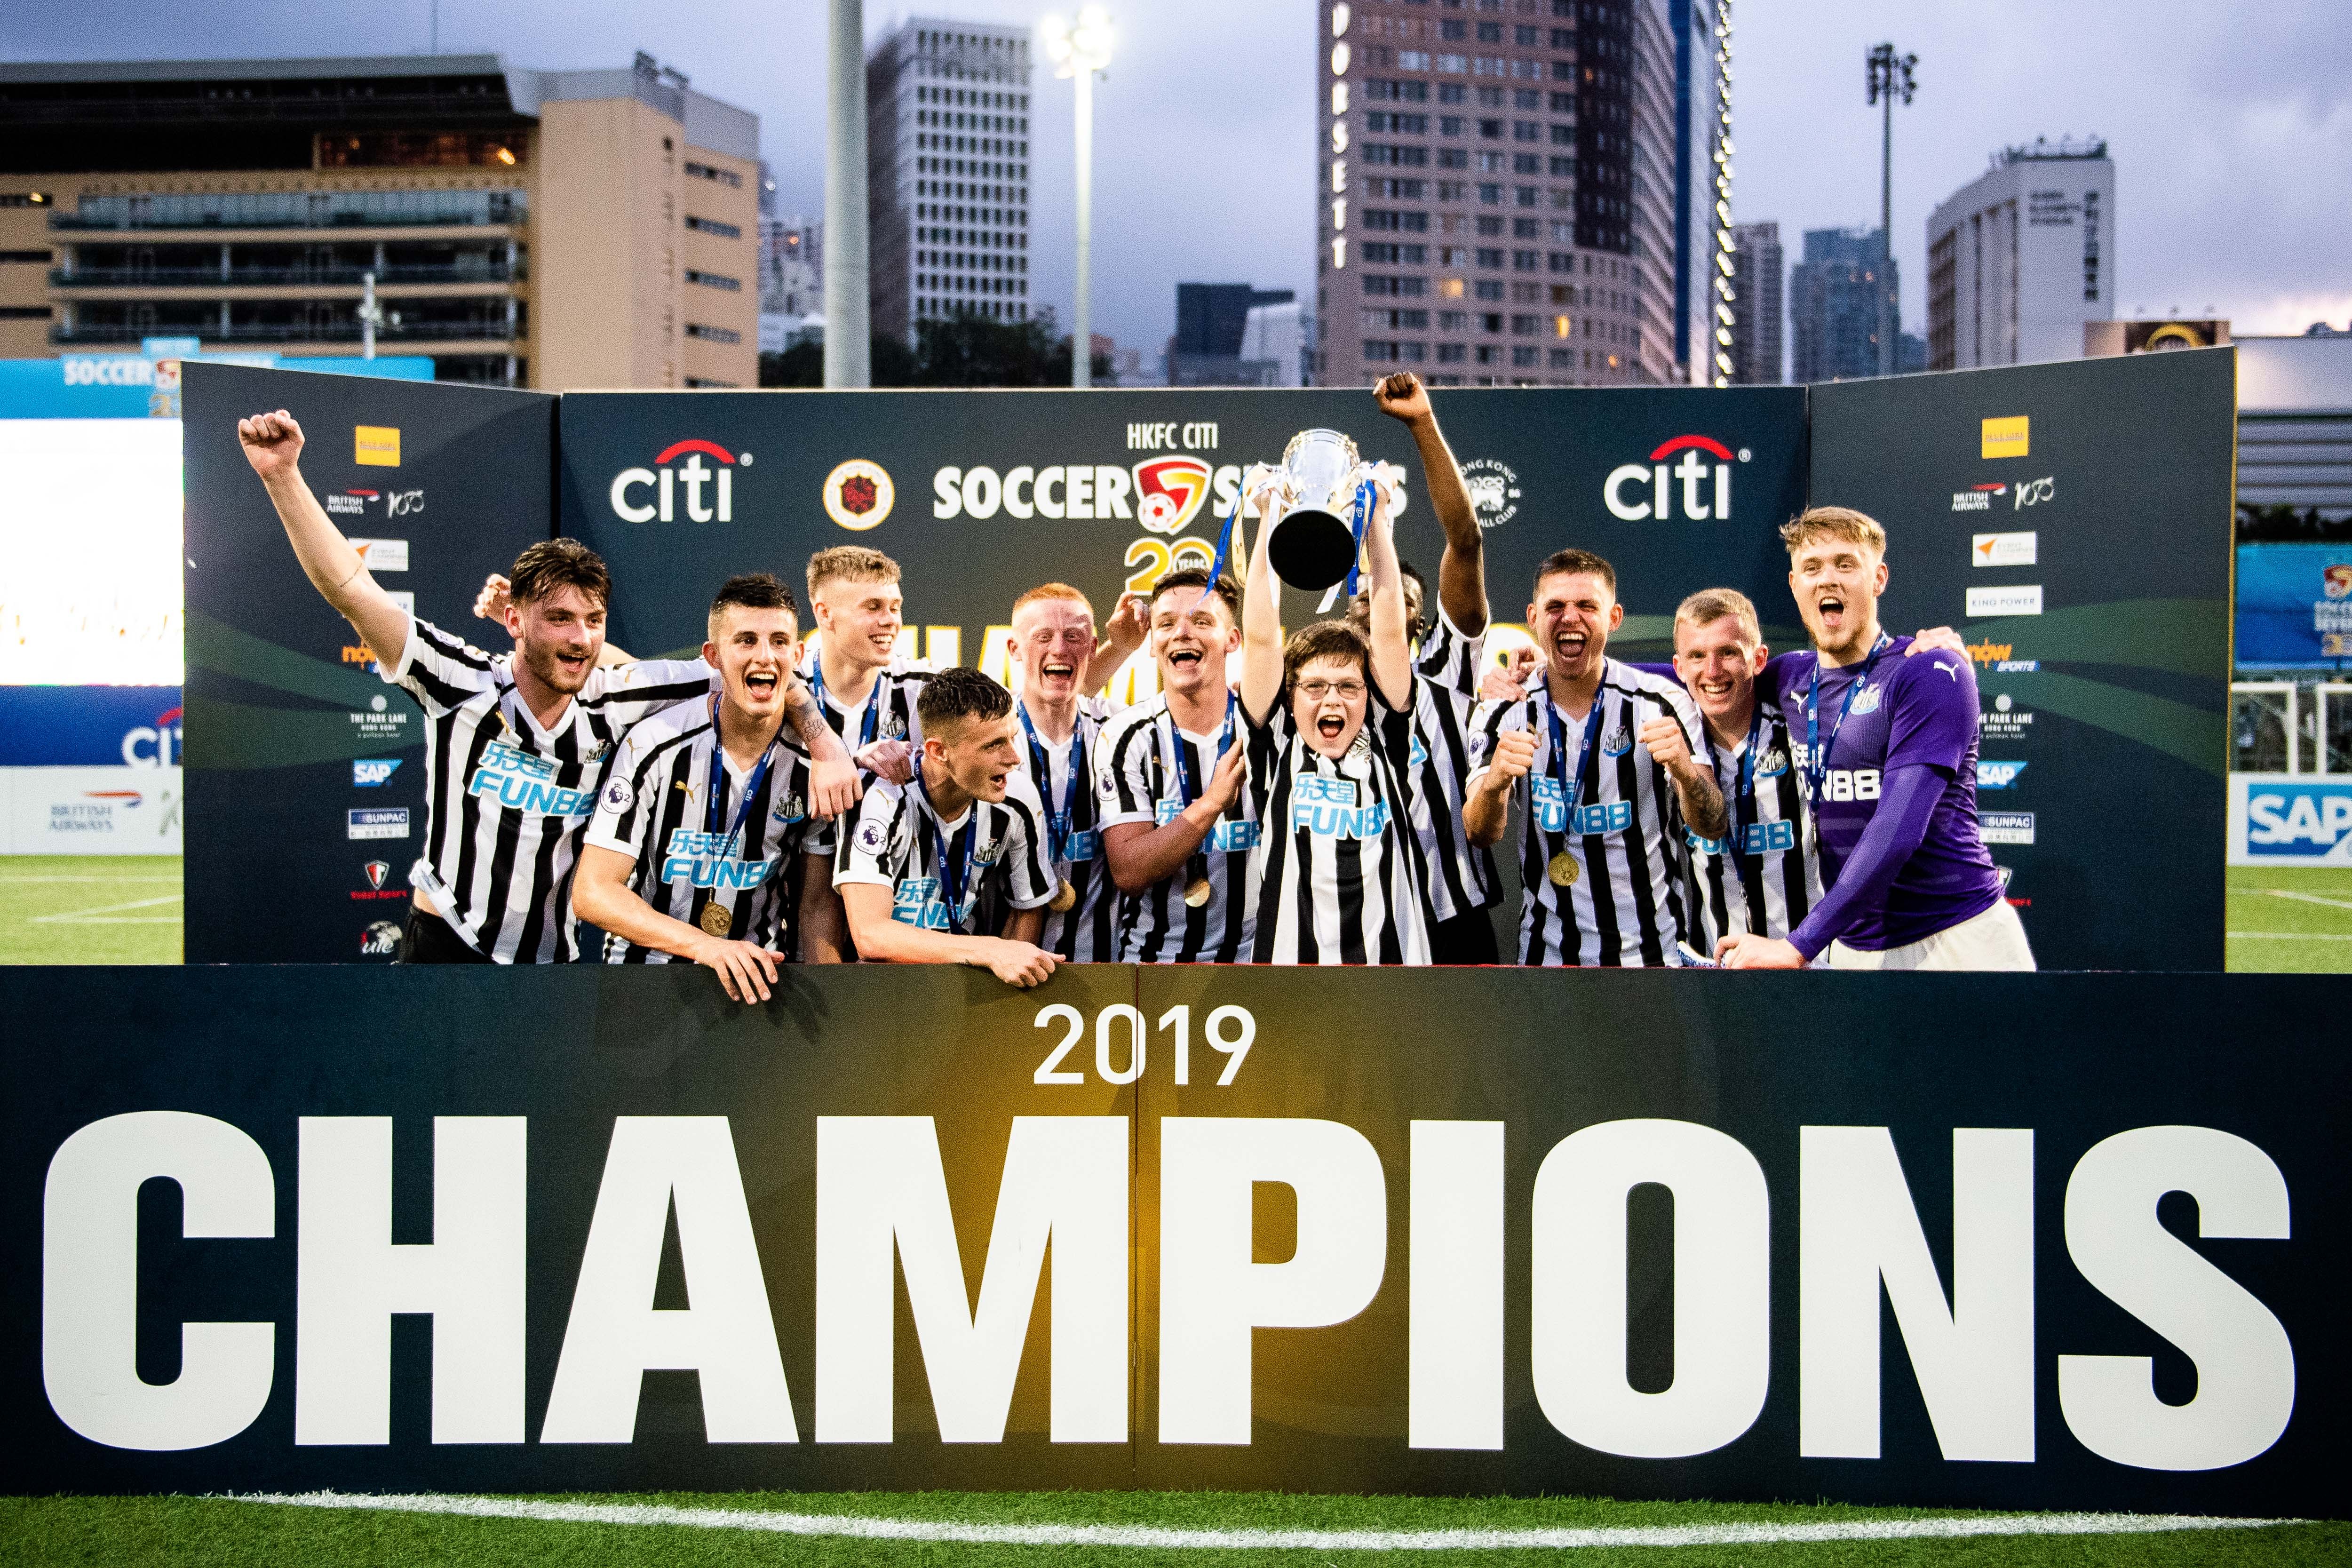 Newcastle United celebrate retaining the Main Cup at the HKFC Citi Soccer Sevens. Photo: Handout